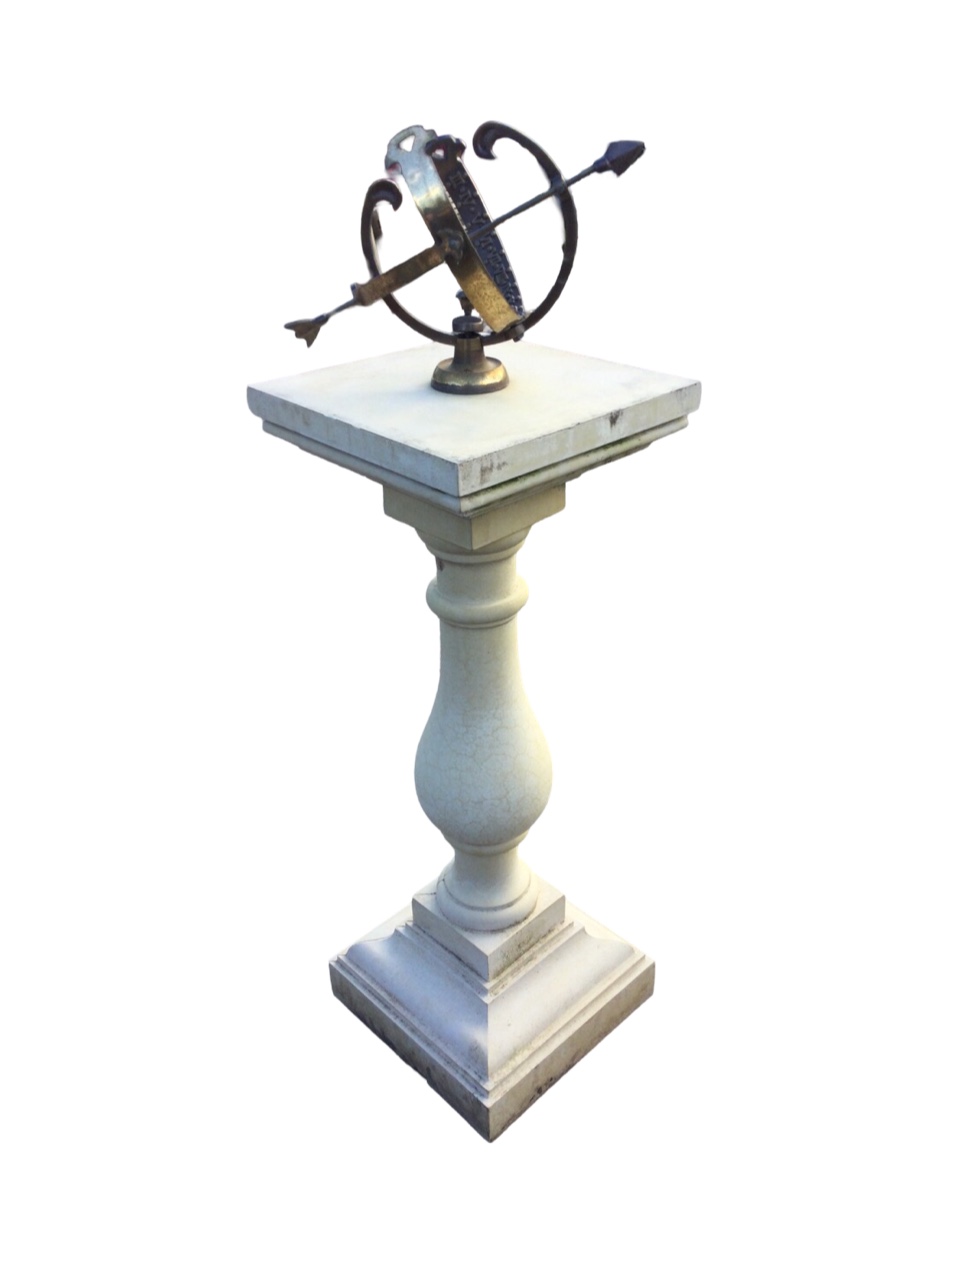 A reproduction brass orrery sundial with armillary sphere on baluster shaped stone column on